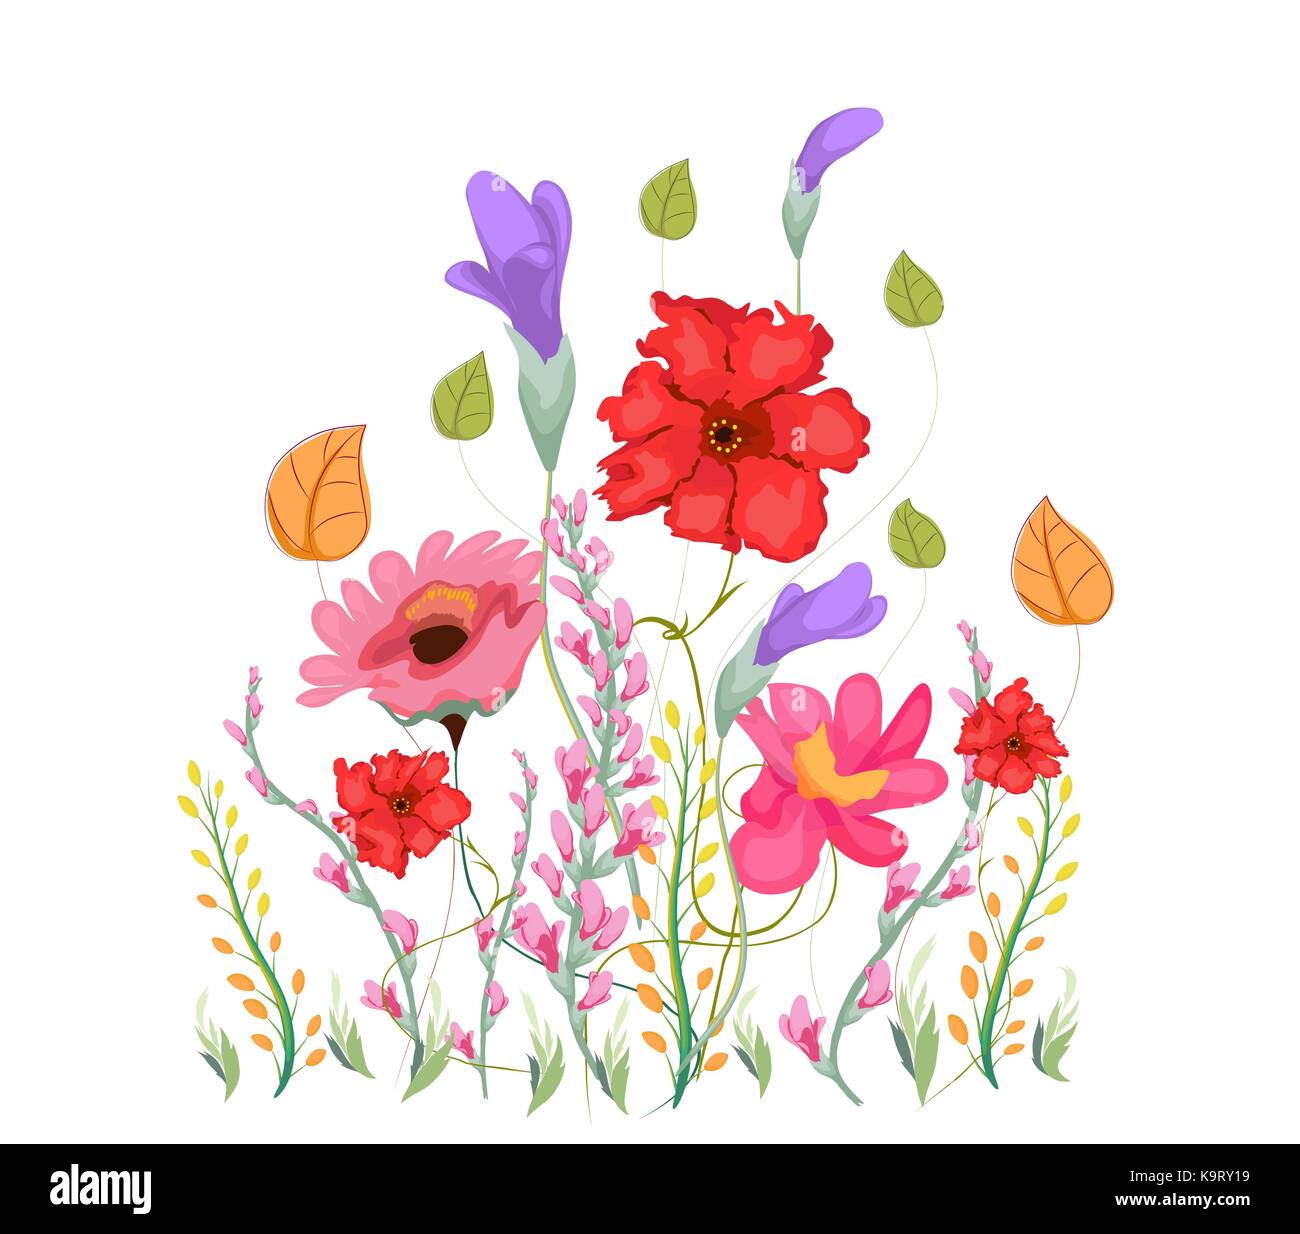 Sweet pea Stock Vector Images - Alamy